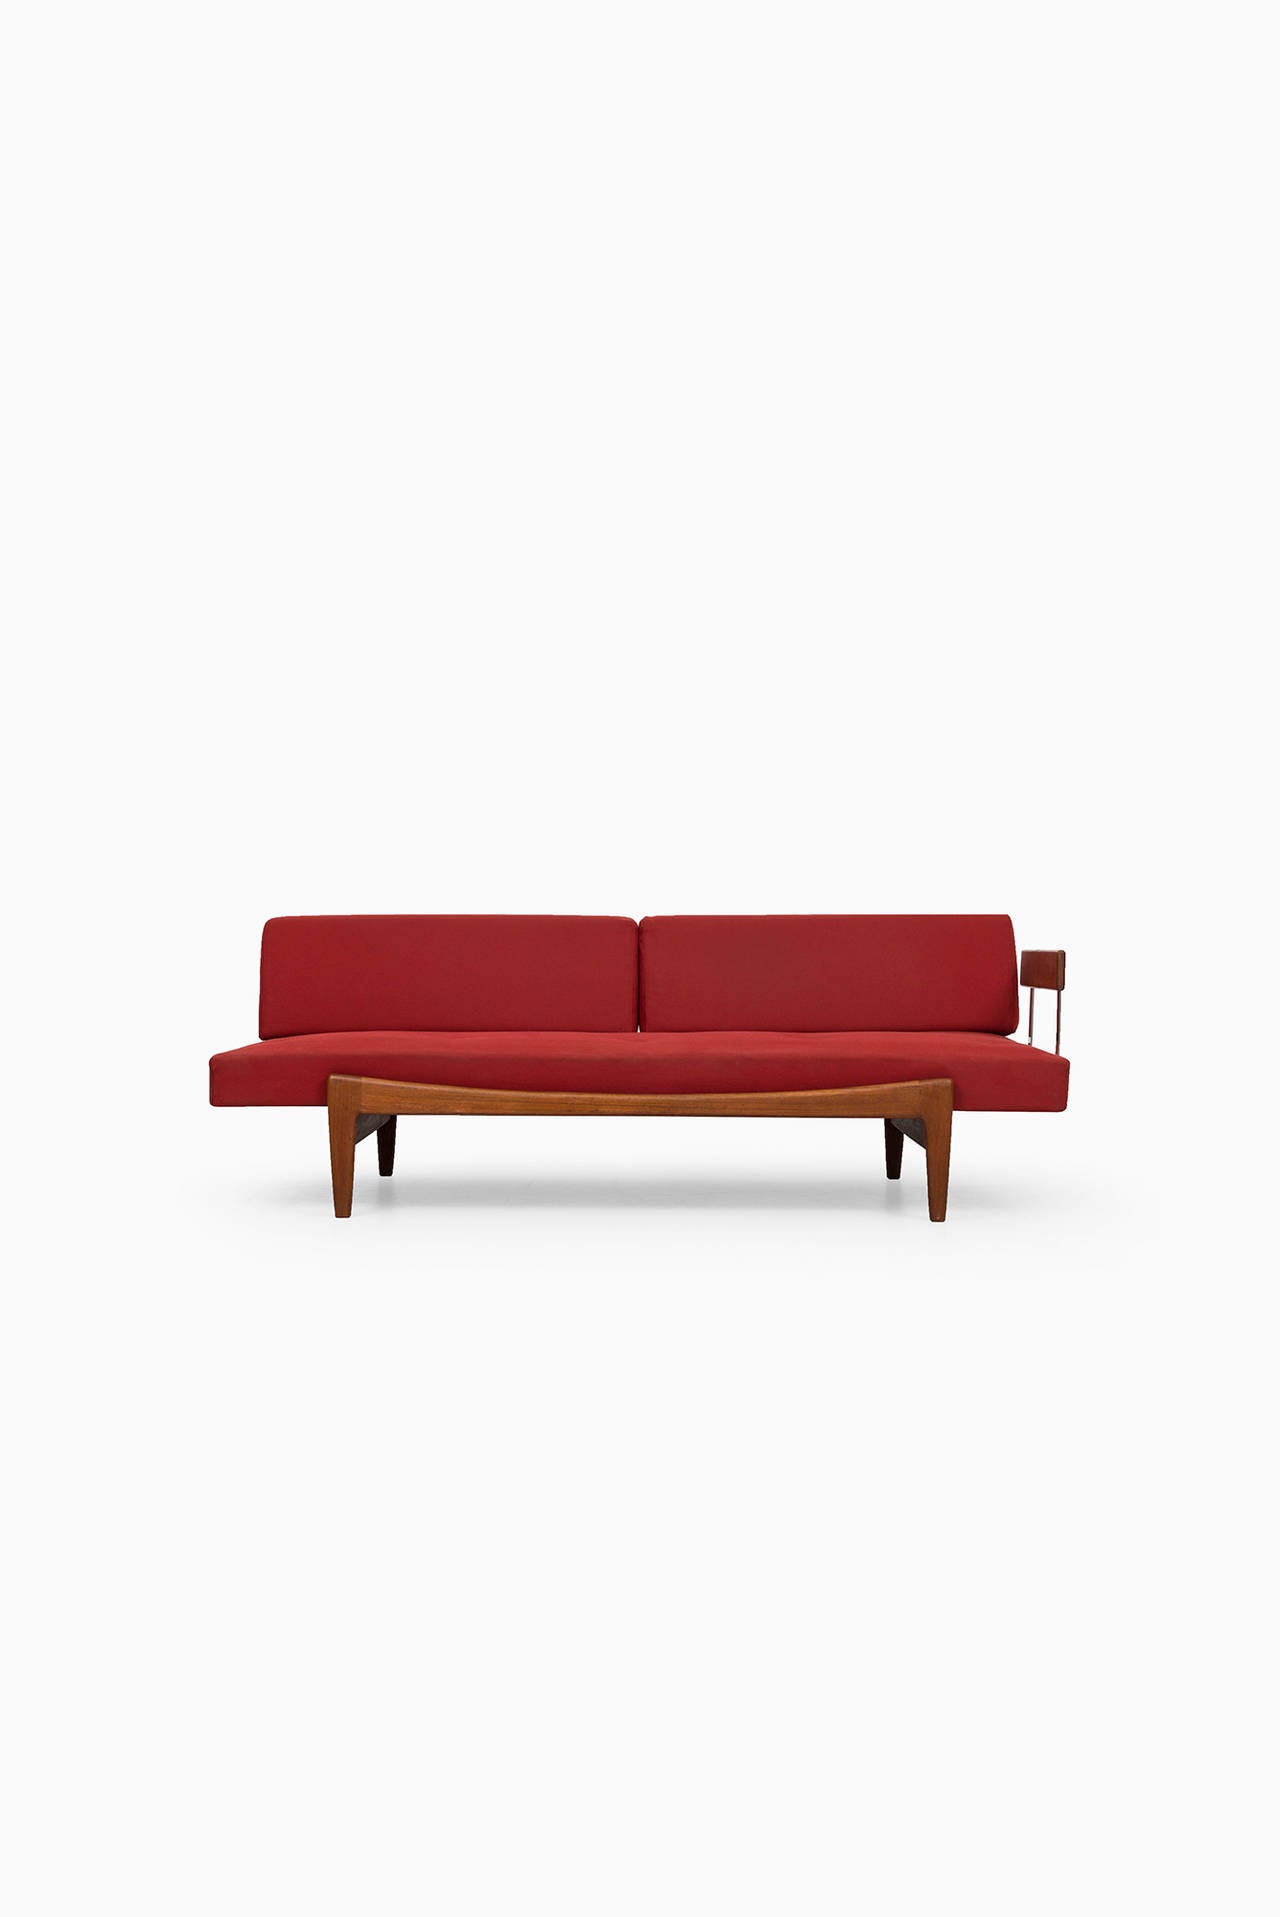 Rare daybed or sofa designed by Ib Kofod-Larsen. Produced by Seffle möbelfabrik in Sweden. Please note: This daybed needs to be re-upholstered.